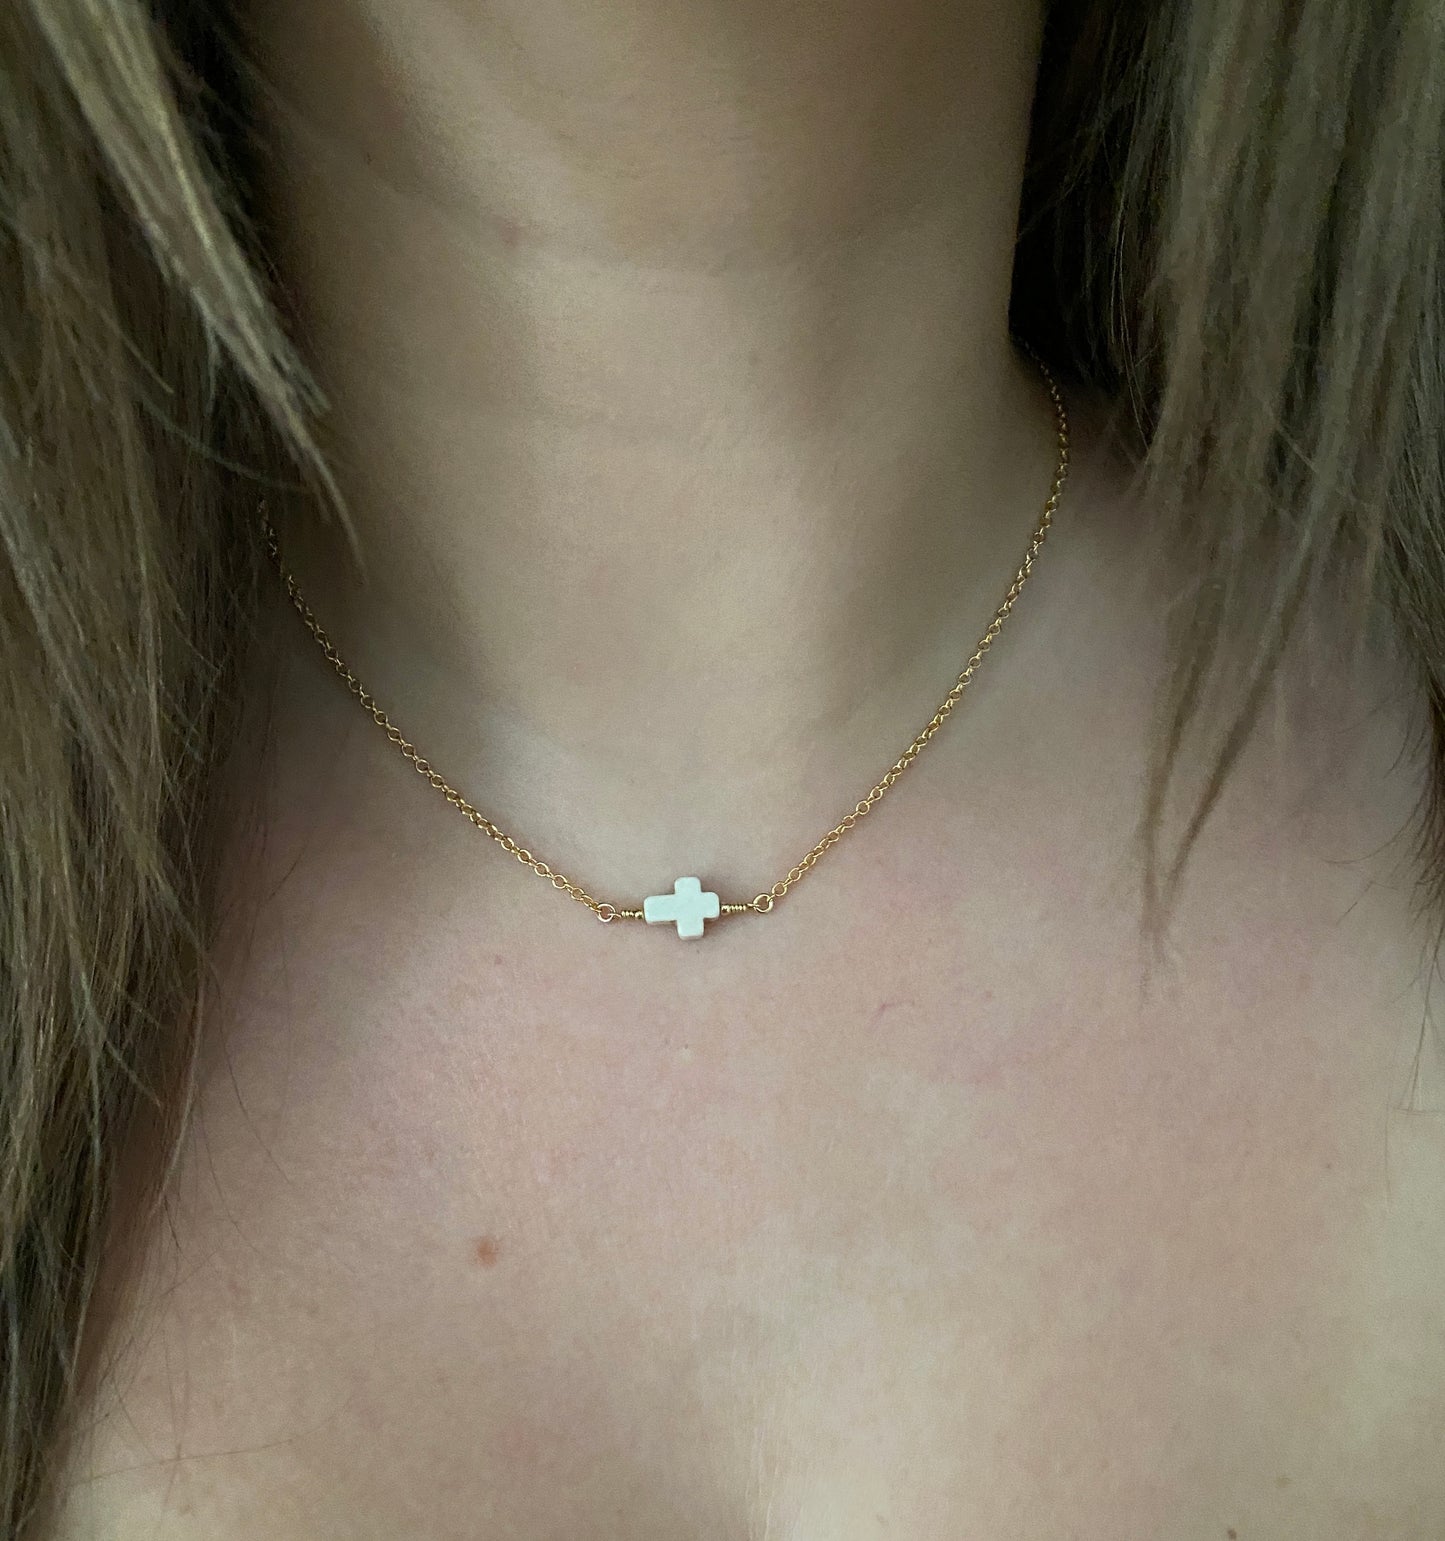 Geovanna Cross necklace in 14KT Goldfilled.